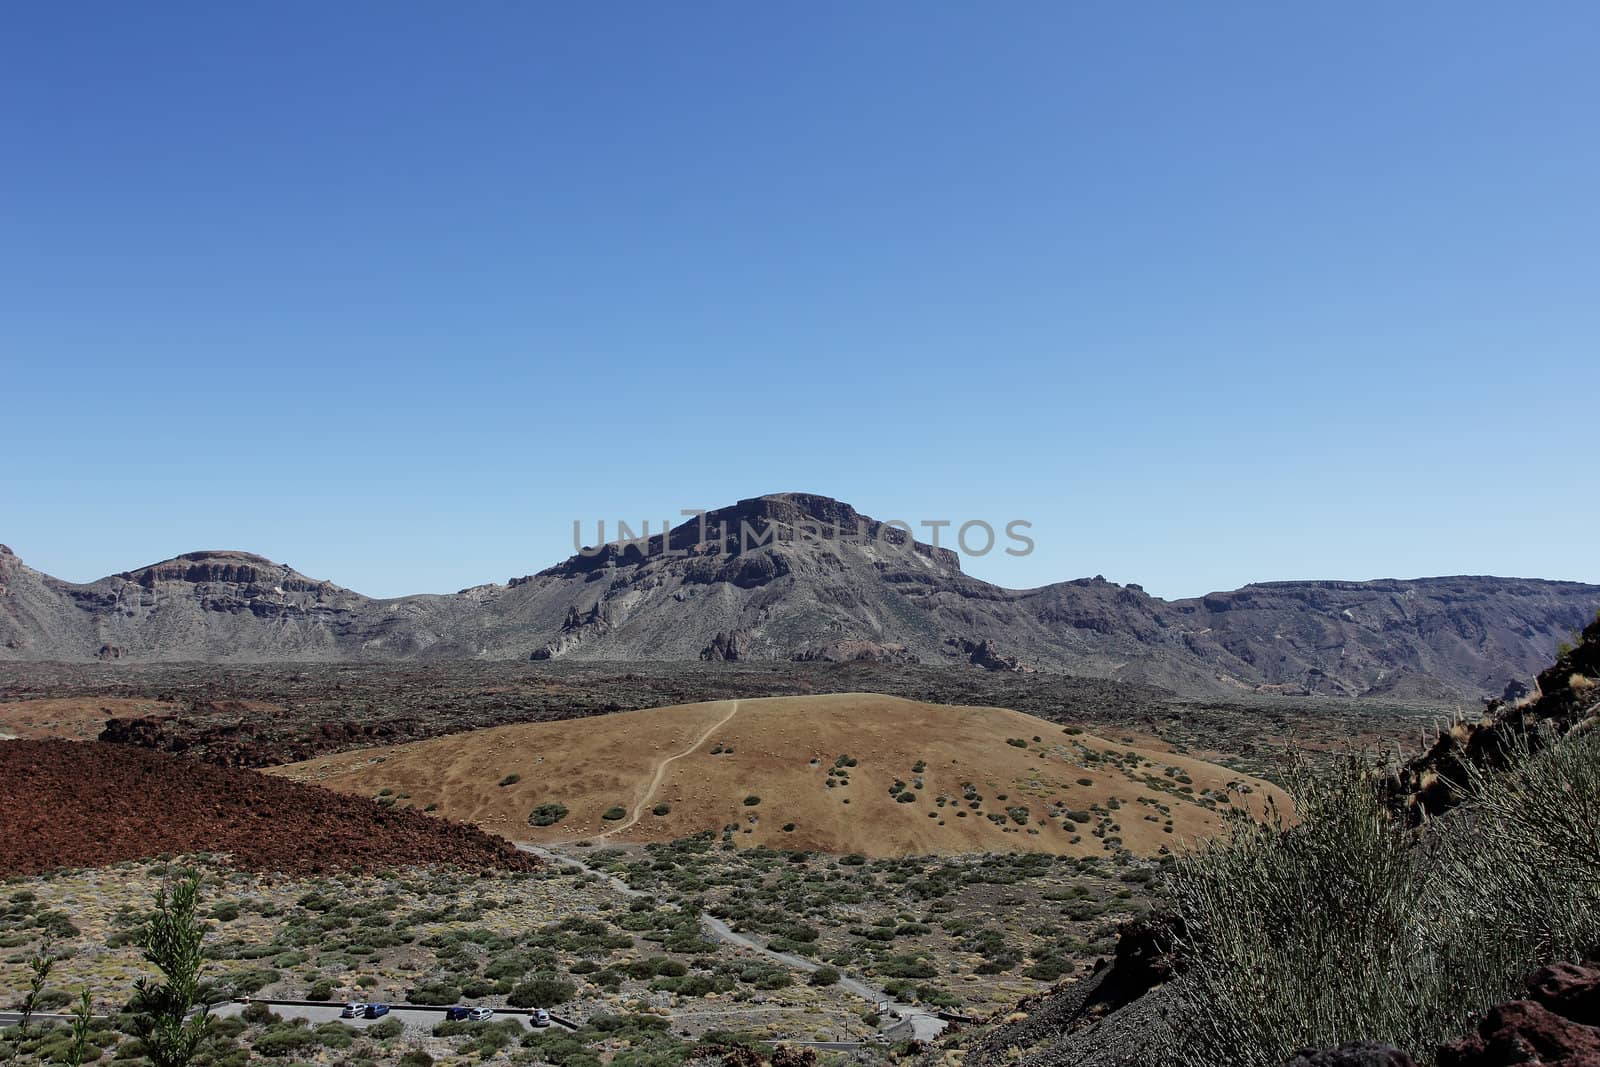 The outer caldera forming the main plateau in the Teide national park. The conical volcano El Tride spain's highest mountain sits in  the center of the plateau formed by the caldera